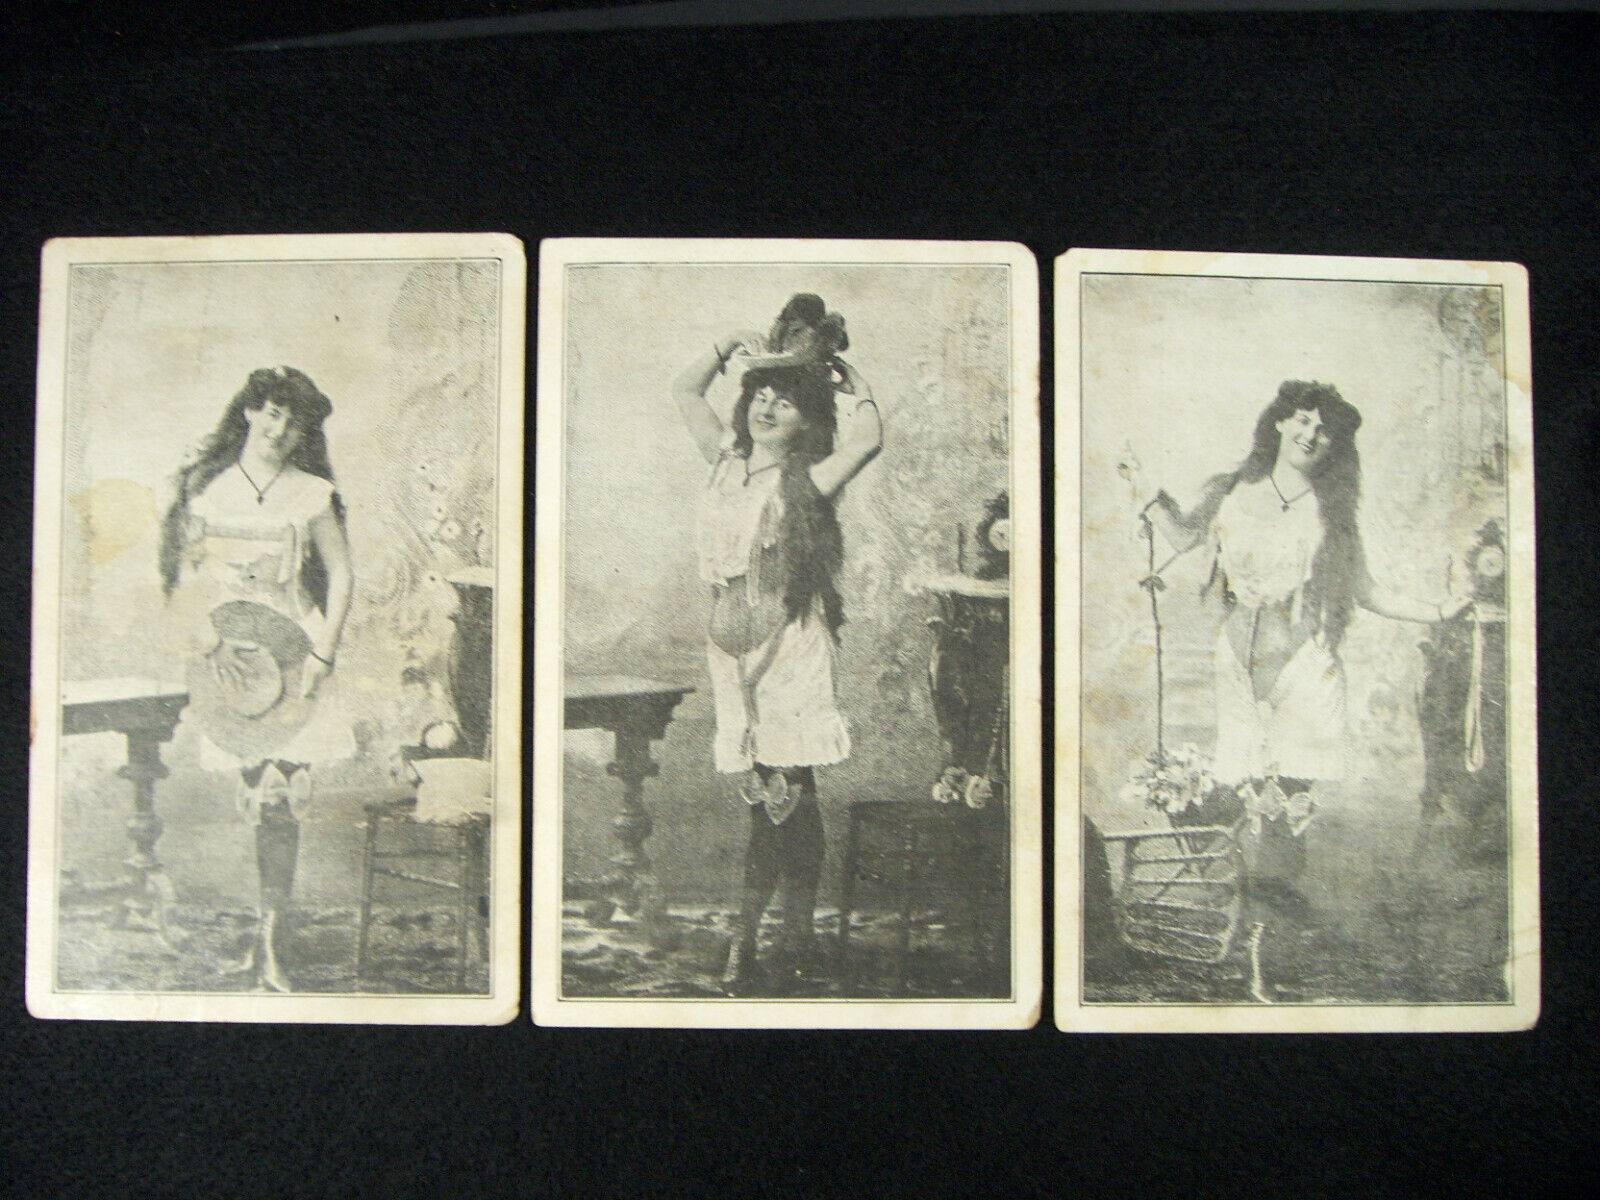 3 Rare Antique Cabinet Card Photos of a Beautiful Lady Posing Wearing Corset